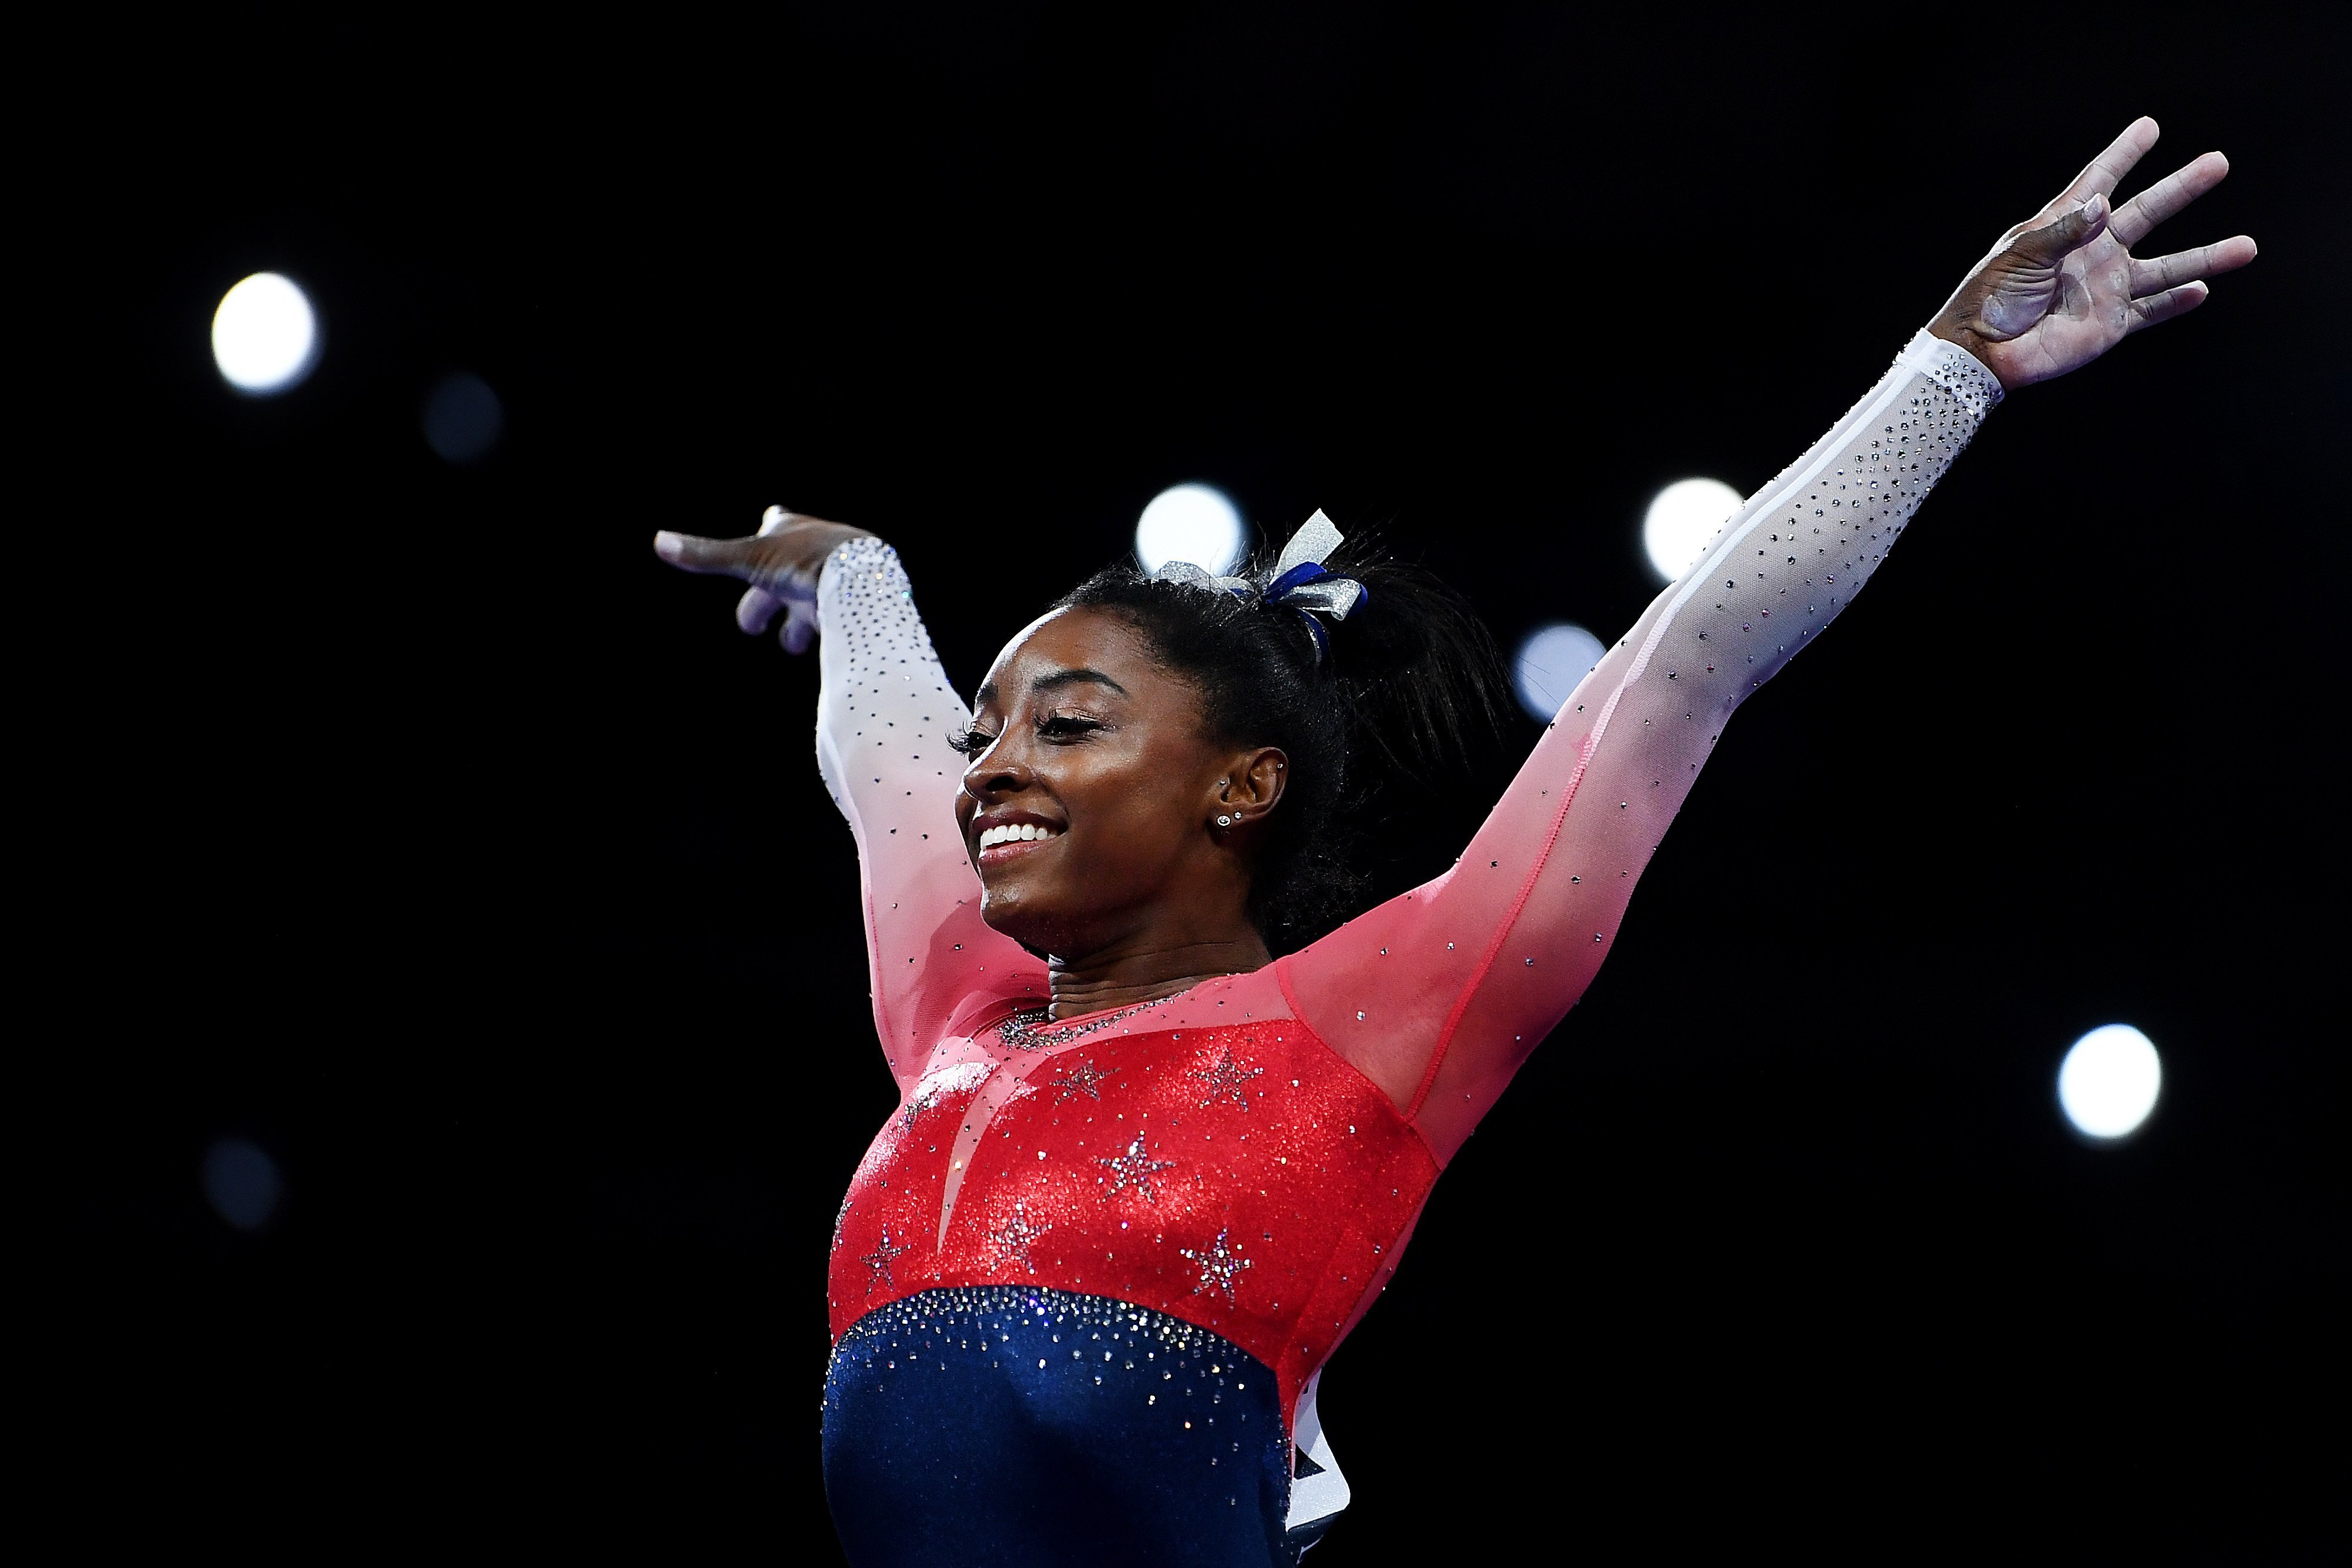 Simone Biles perfroming on the vault during day 5 of the FIG Artistic Gymnastics World Championships in Germany on October 8, 2019. | Photo: Getty Images